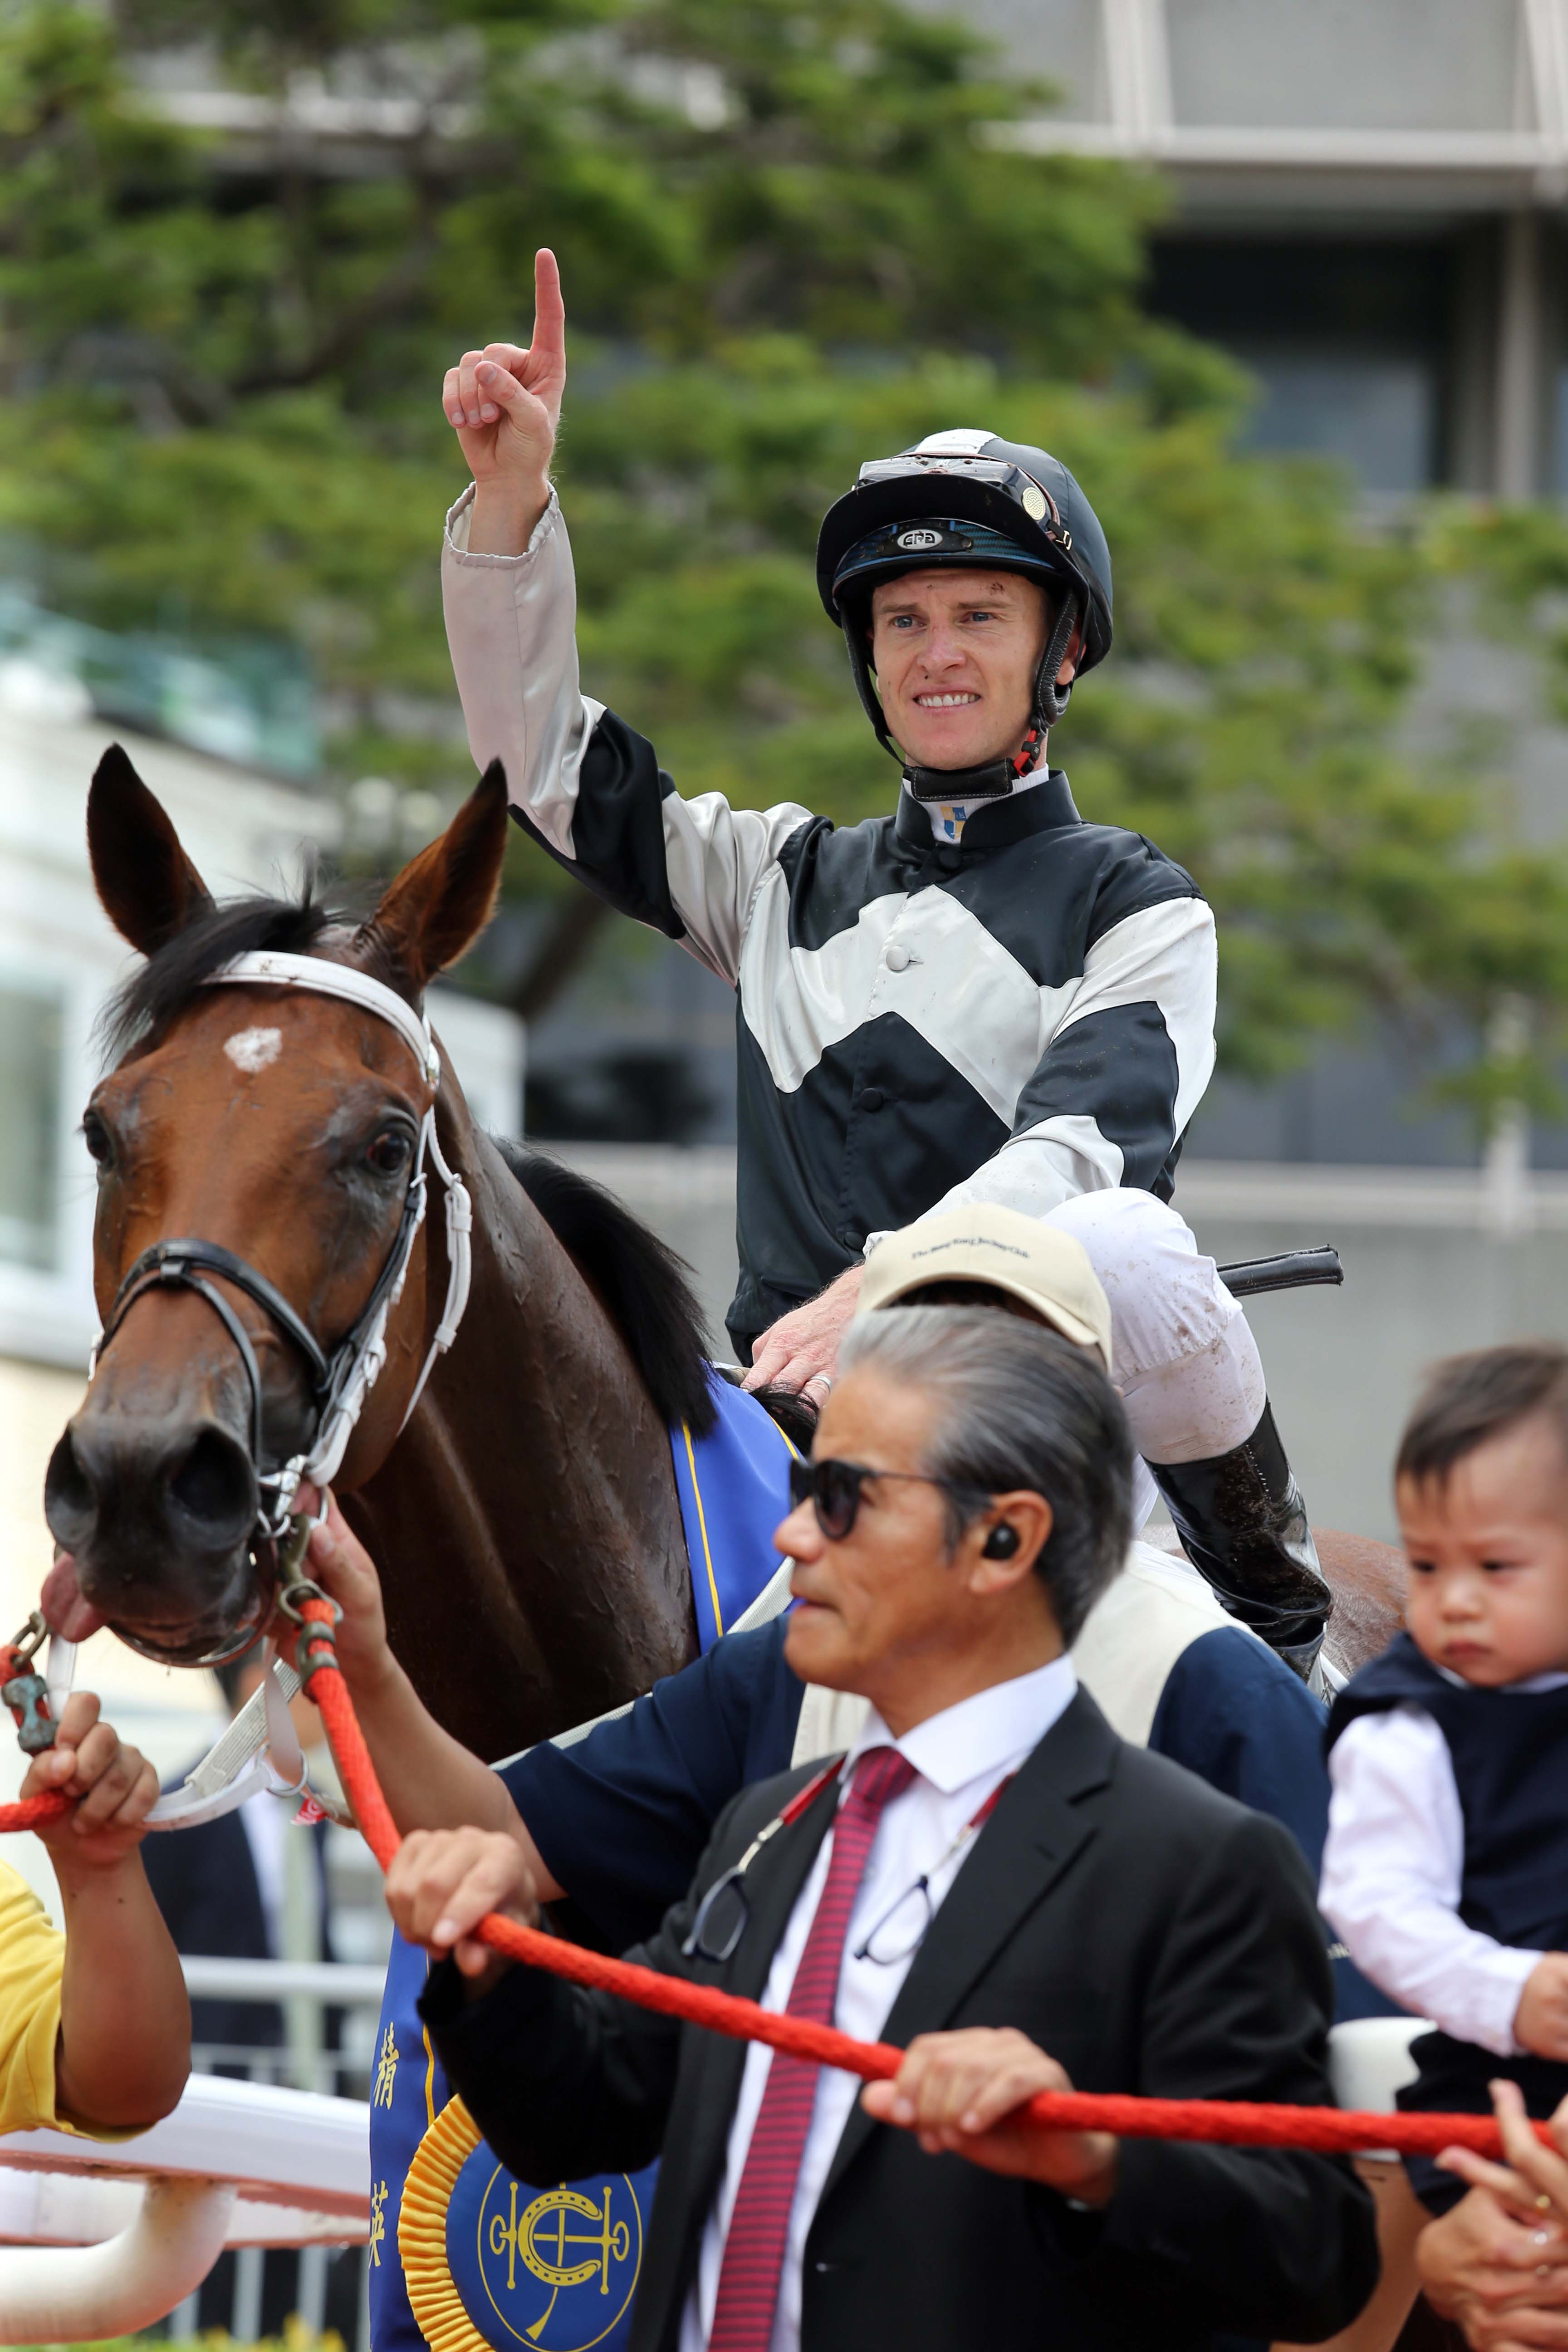 Zac Purton celebrates another win in his quest for the champion jockey title.